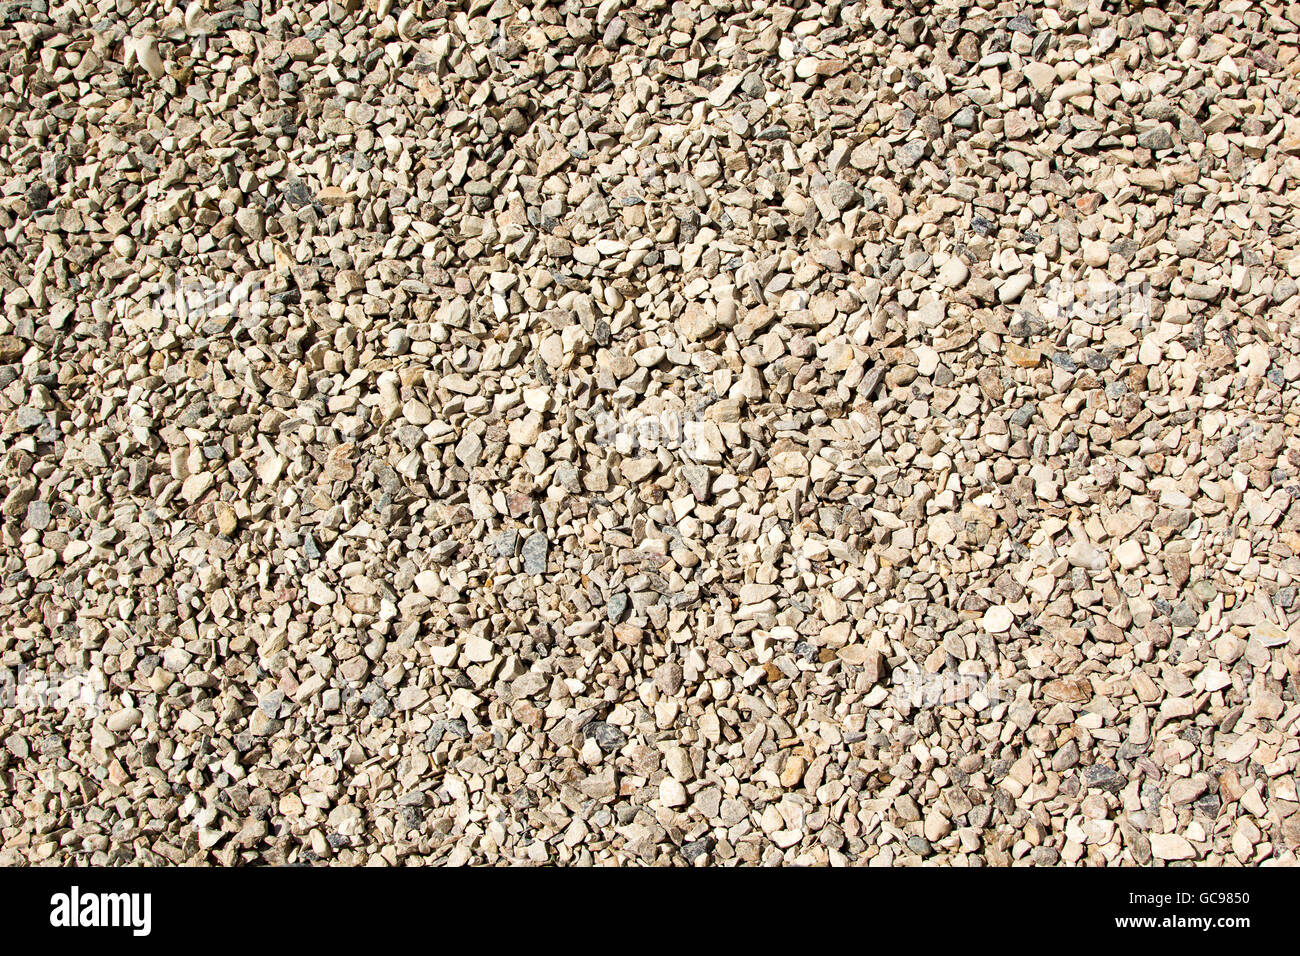 background of gravel rubble fractions 5 - 20 Stock Photo